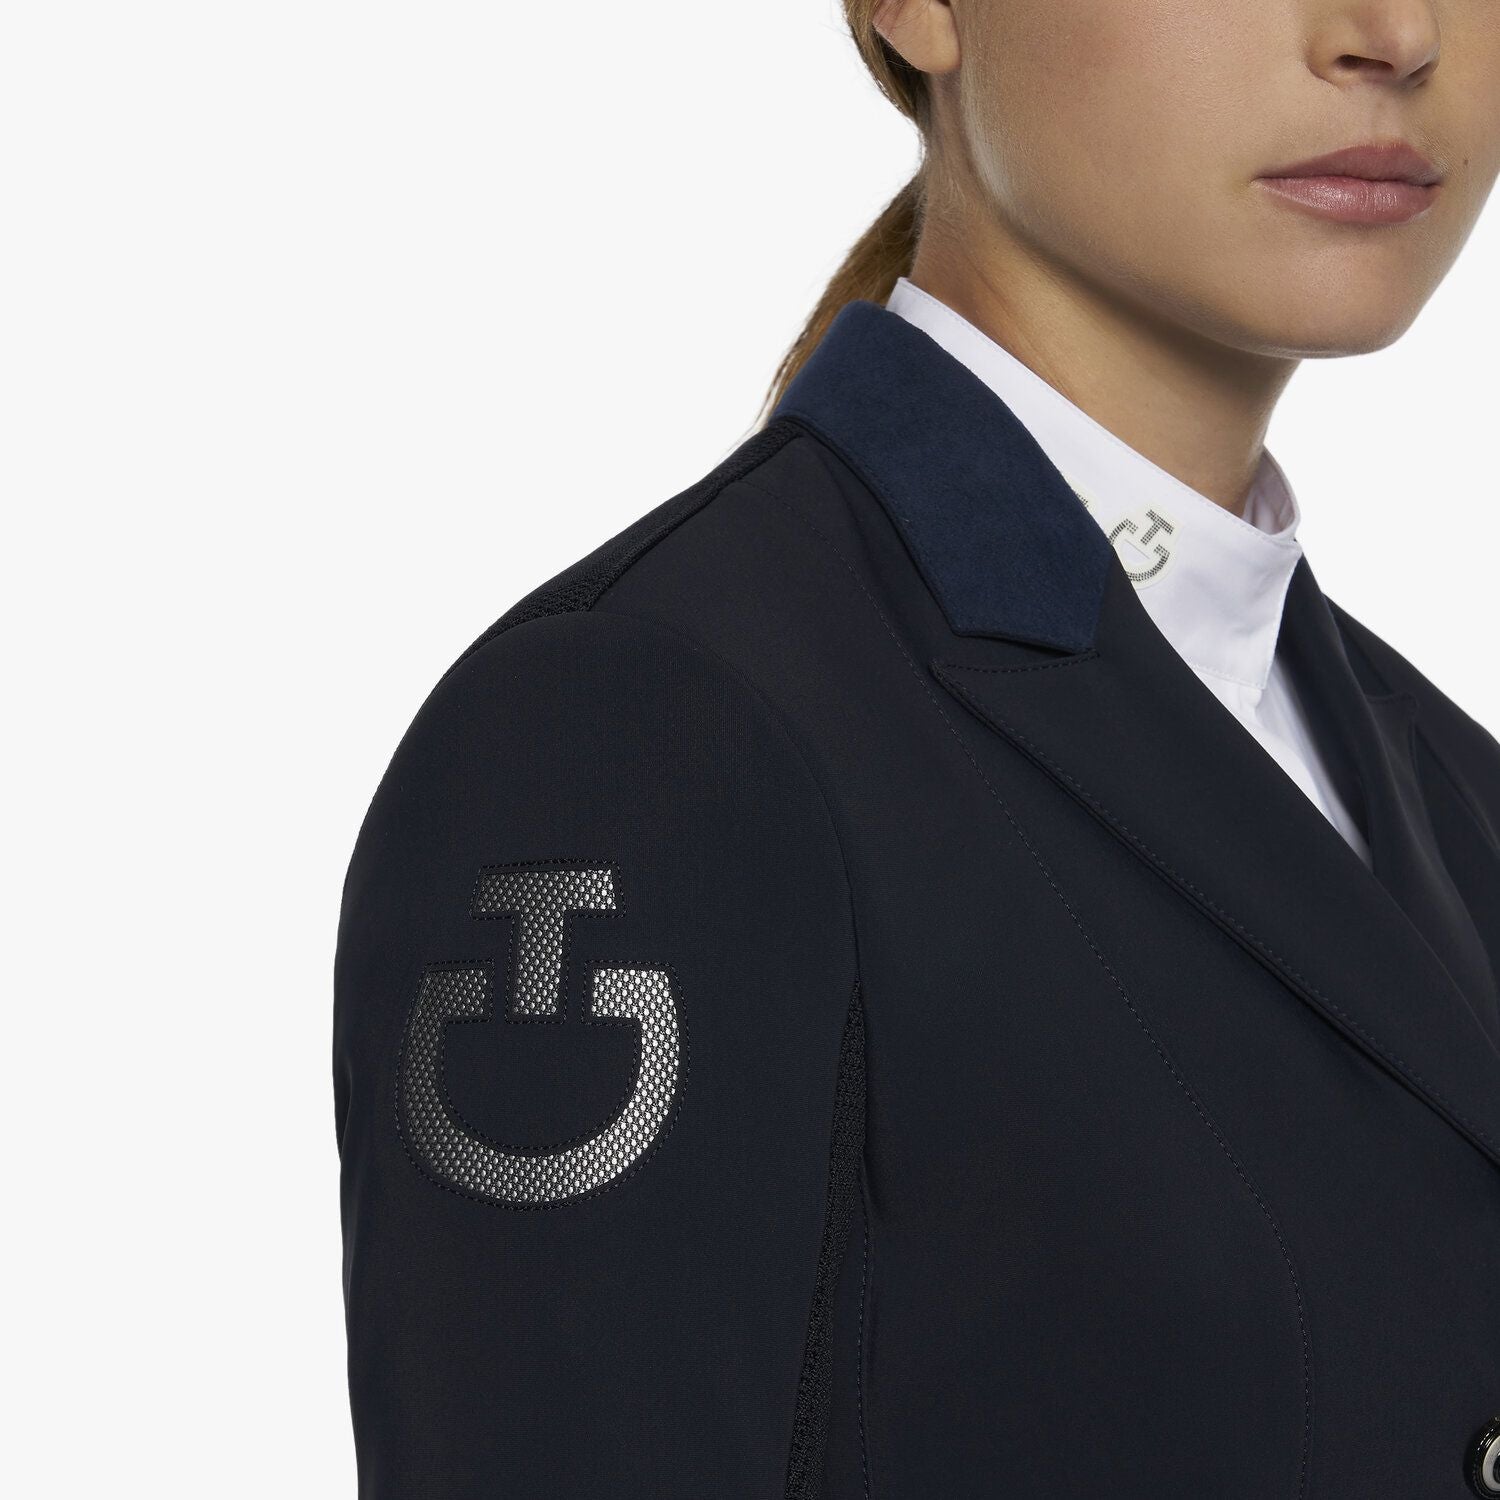 The tailcoat is refined by alcantara collar, piping and points, while the metallic buttons are refined by a logo. Bottom tails include removable weights for greater stabilty and elegance during performance. The look is completed by a functional front pocket and an embroidered logo on the shoulder. 